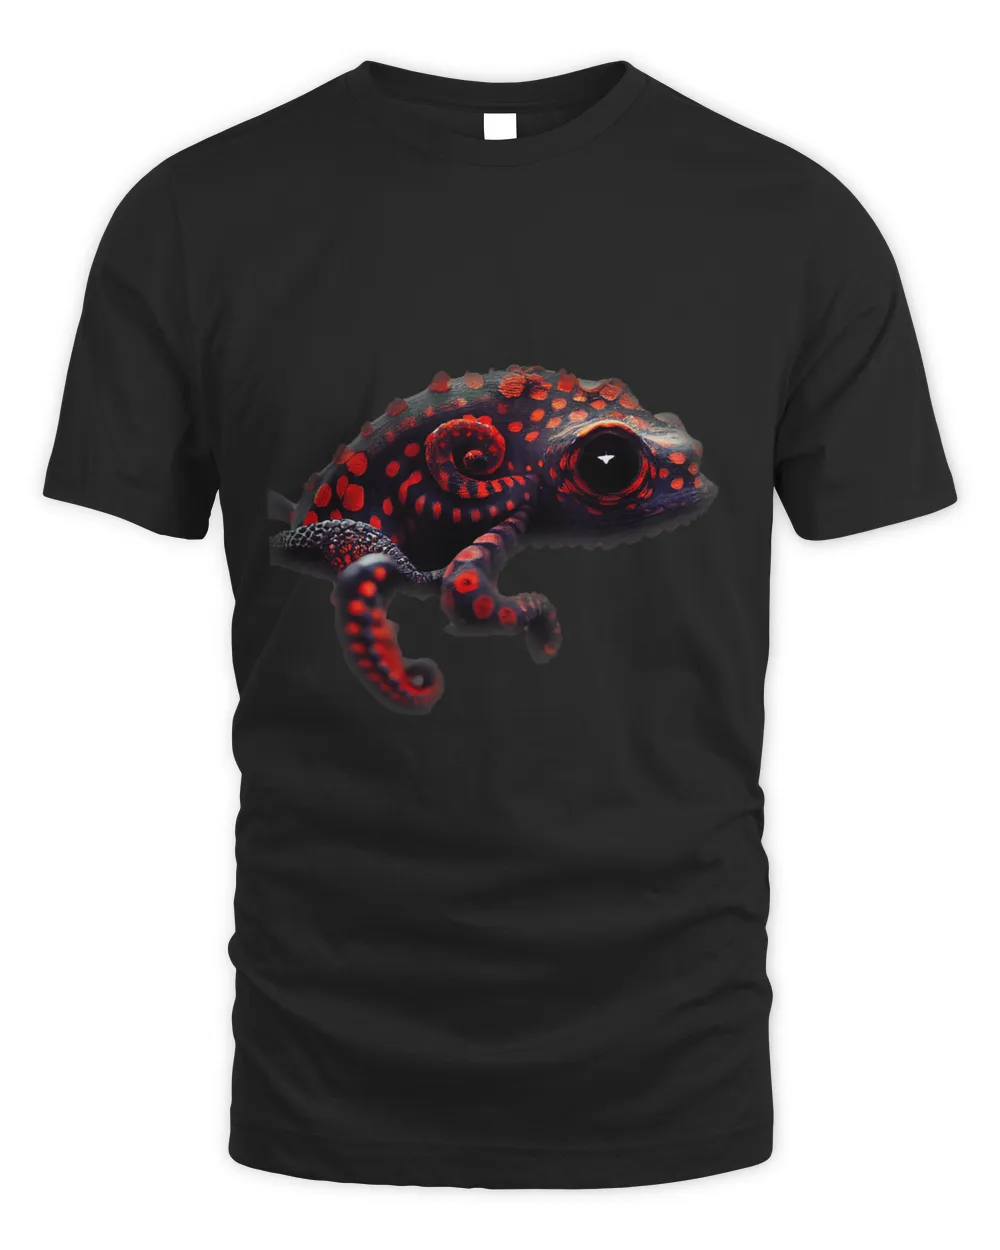 Octopus Lover Black Octopus Chameleon With Red Eyes Uncanny Art